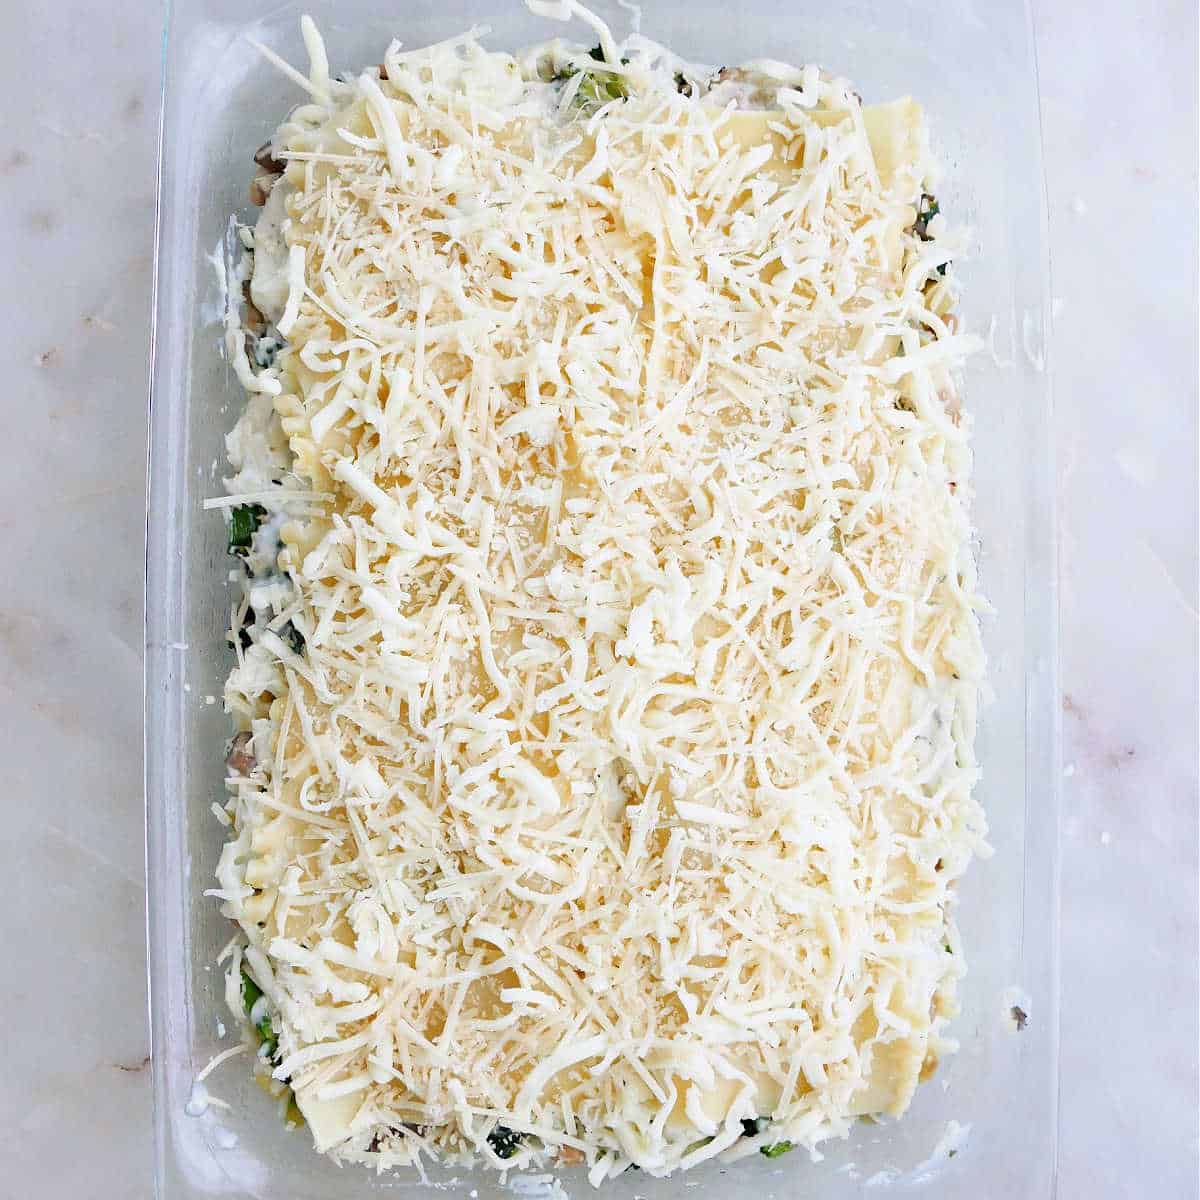 lasagna ingredients topped with shredded cheese in a baking dish